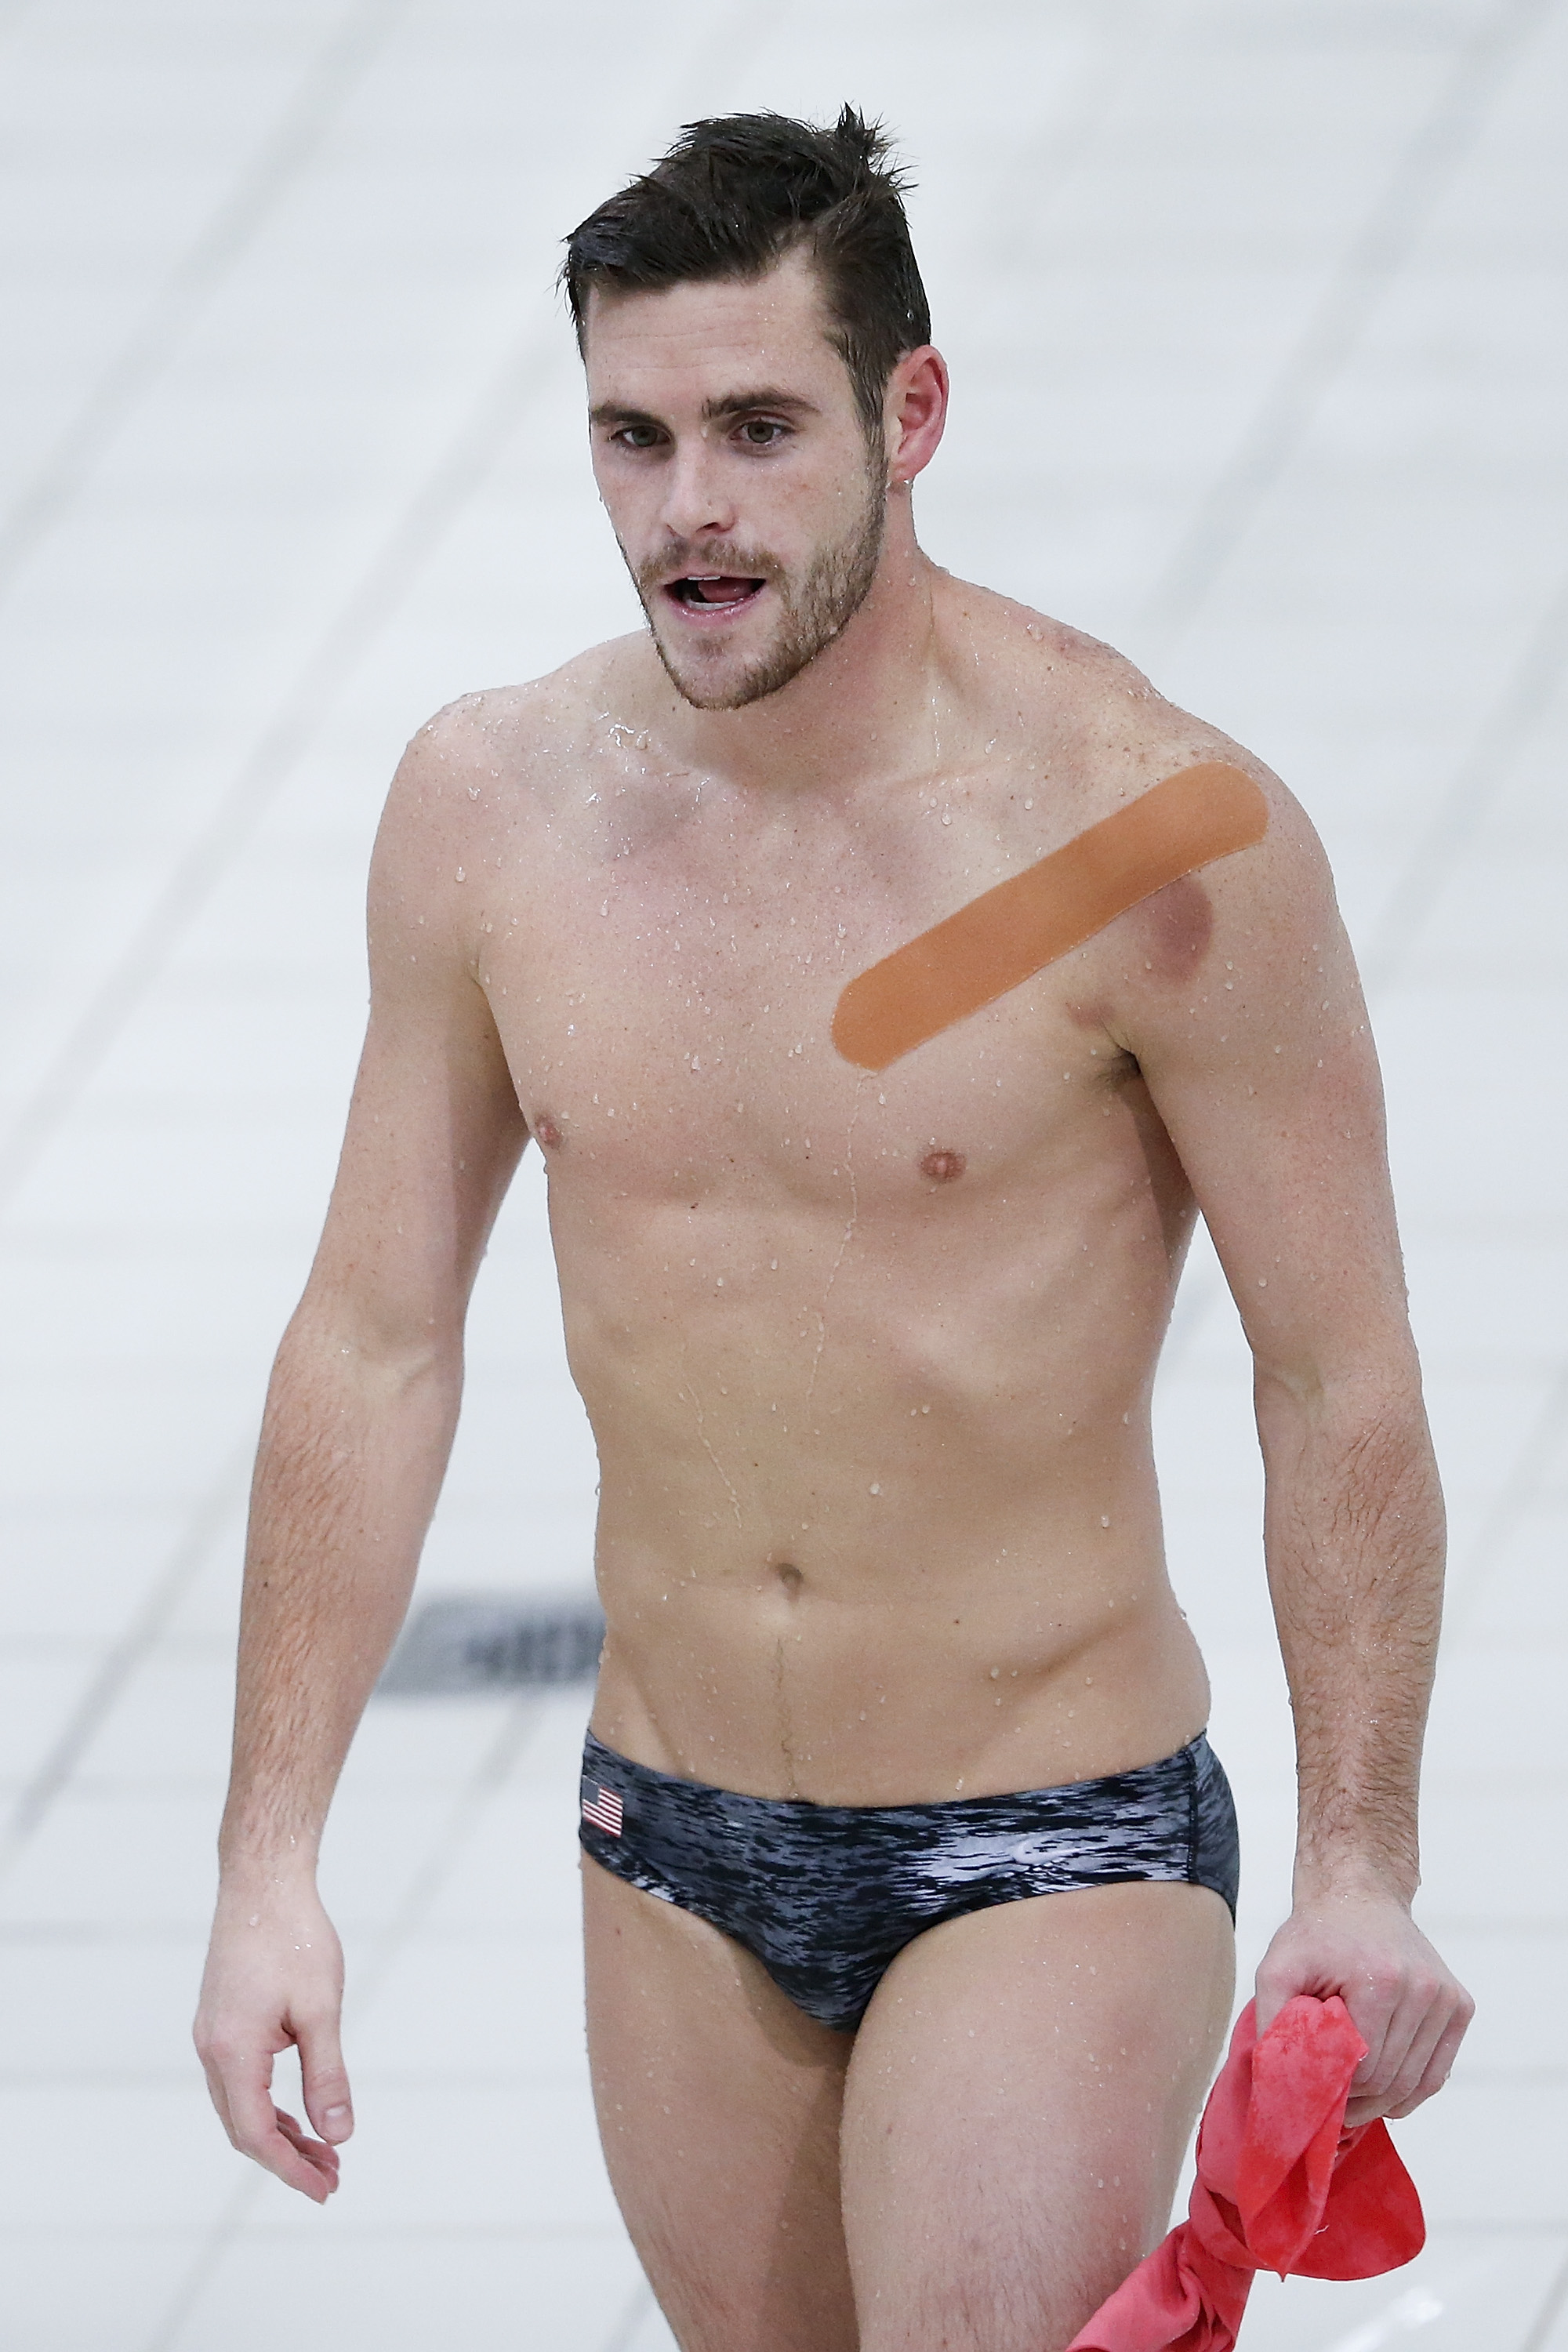 BEIJING, CHINA - MARCH 13: David Boudia of United States reacts after competing in the Men's 10m Synchro Final during day three of the FINA/NVC Diving World Series 2016 Beijing Station at the National aquatics center-Water Cube on March 13, 2016 in Beijing, China. (Photo by Lintao Zhang/Getty Images)